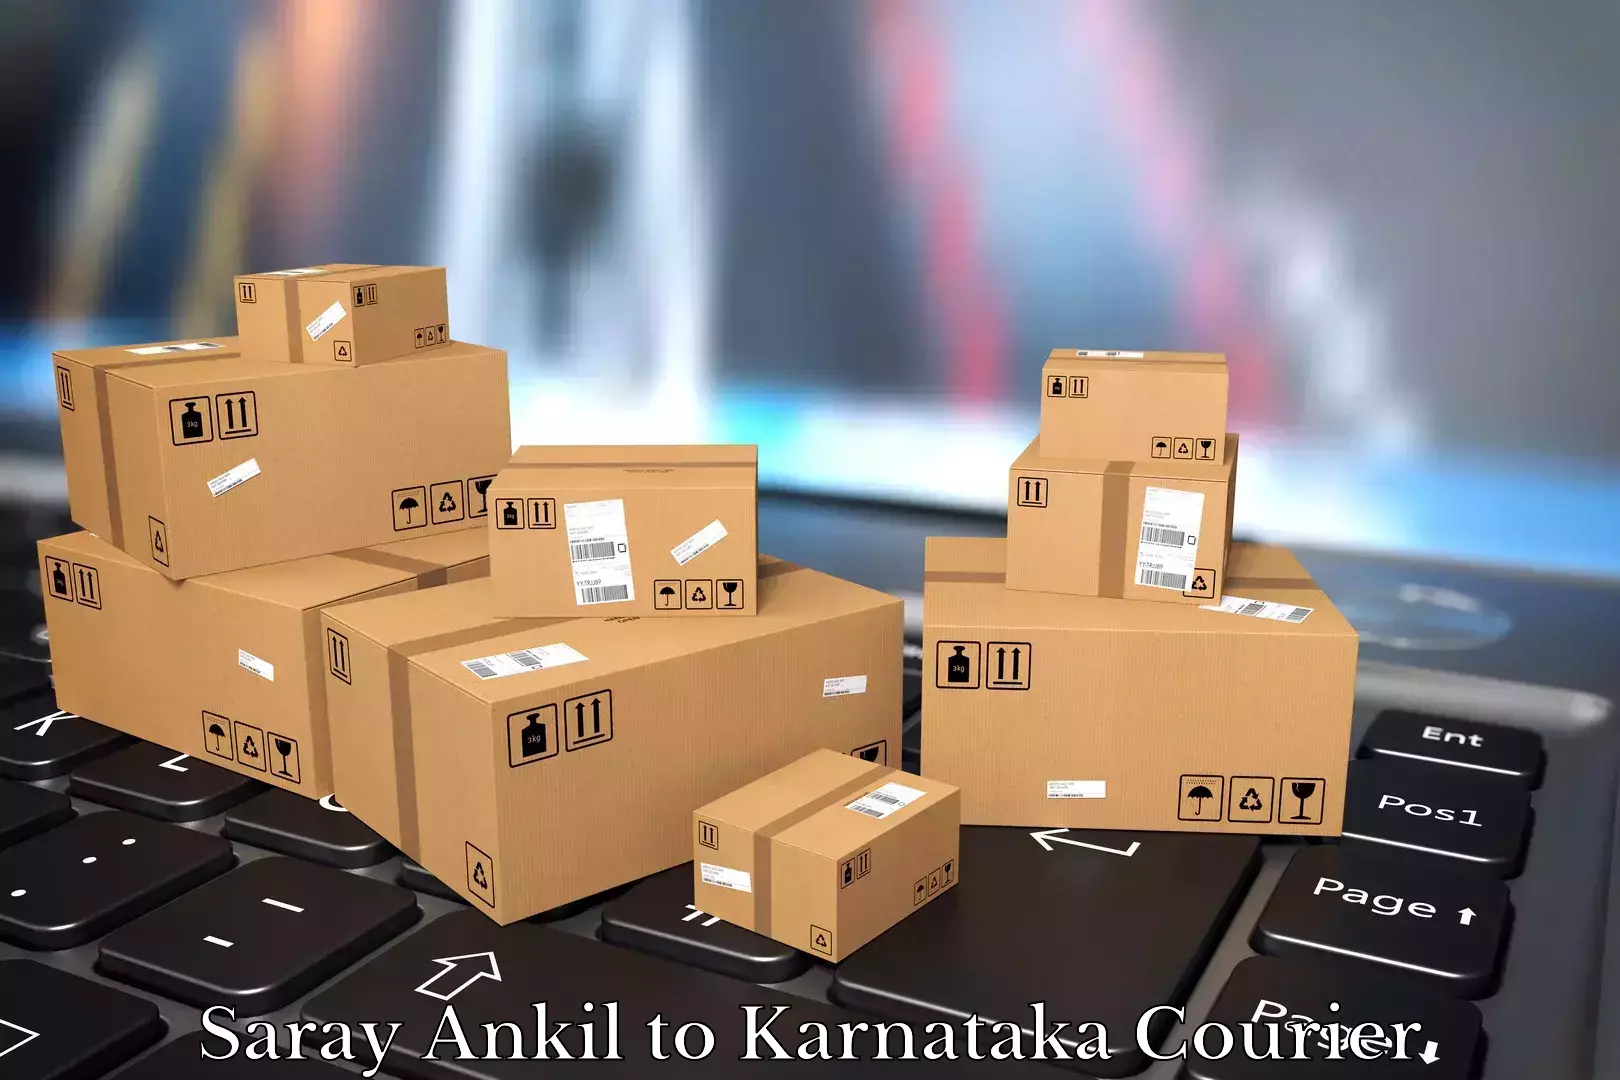 Furniture delivery service Saray Ankil to Chikkamagalur